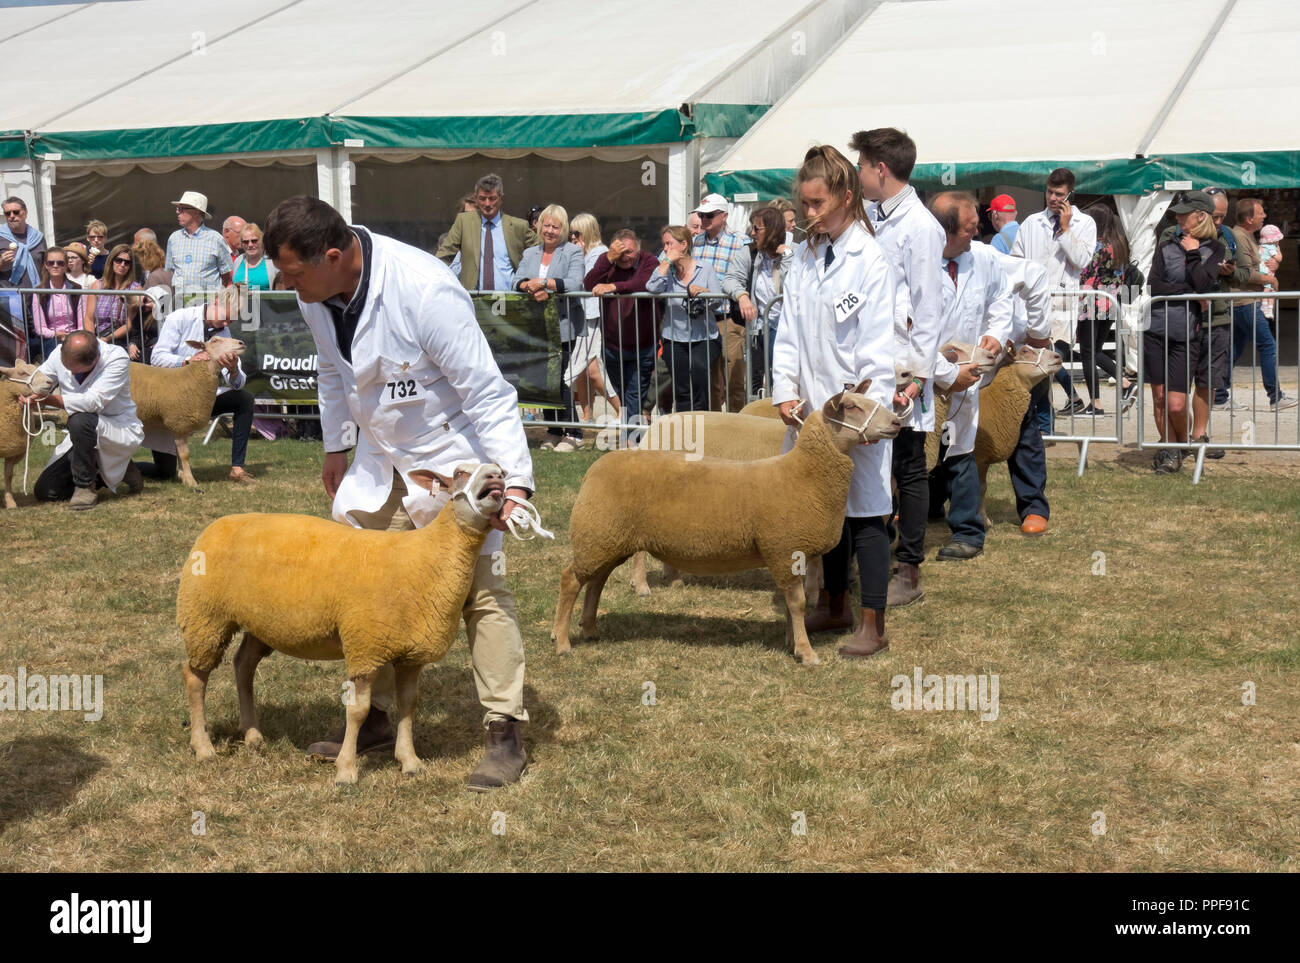 Farmers showing British Charollais sheep at the Great Yorkshire Show in summer Harrogate North Yorkshire England UK United Kingdom GB Great Britain Stock Photo